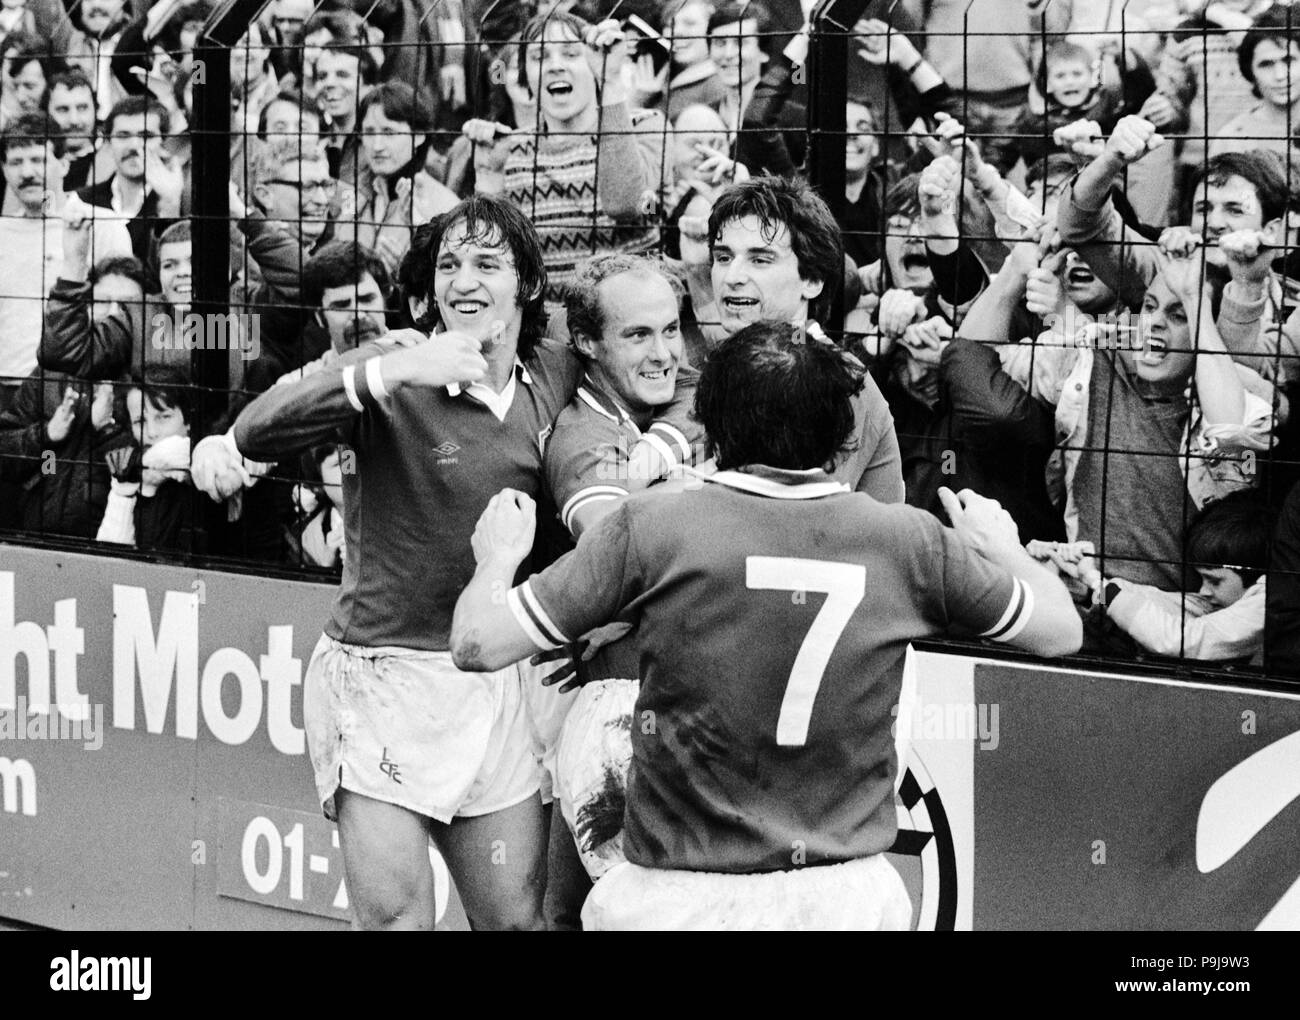 Leicester City's goalscorer Ian Wilson (centre) is congratulated by (L-R) Gary Lineker, Steve Lynex (No 7) and Alan Smith in front of jubilant Leicester City supporters. Leicester beat Fulham 1-0 at Craven Cottage. Stock Photo